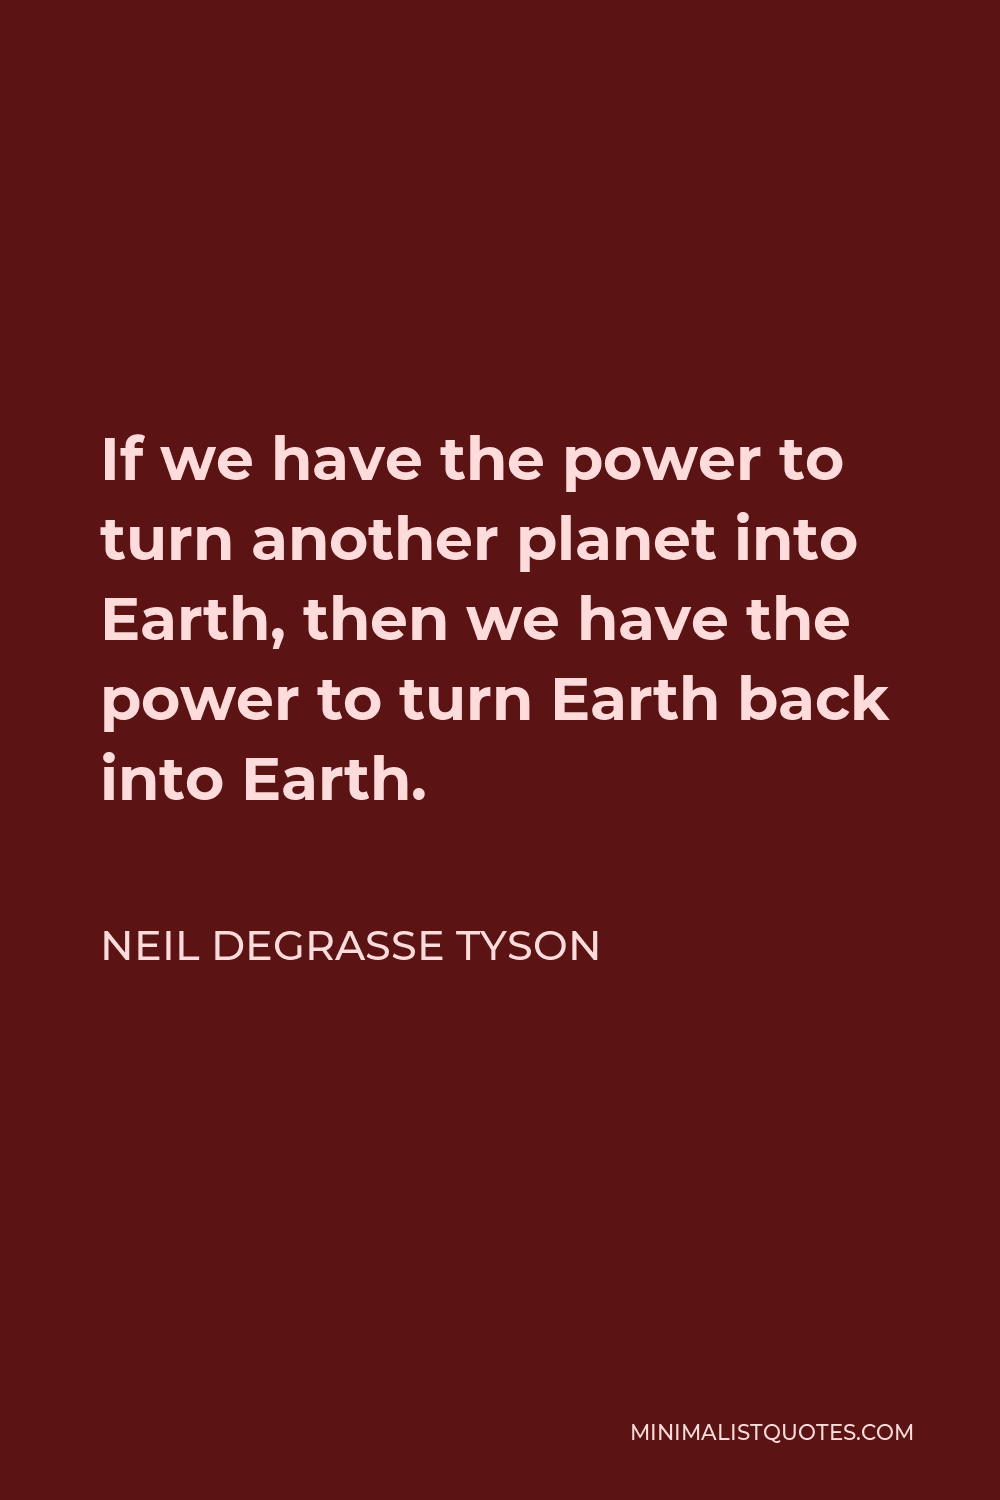 Neil deGrasse Tyson Quote - If we have the power to turn another planet into Earth, then we have the power to turn Earth back into Earth.